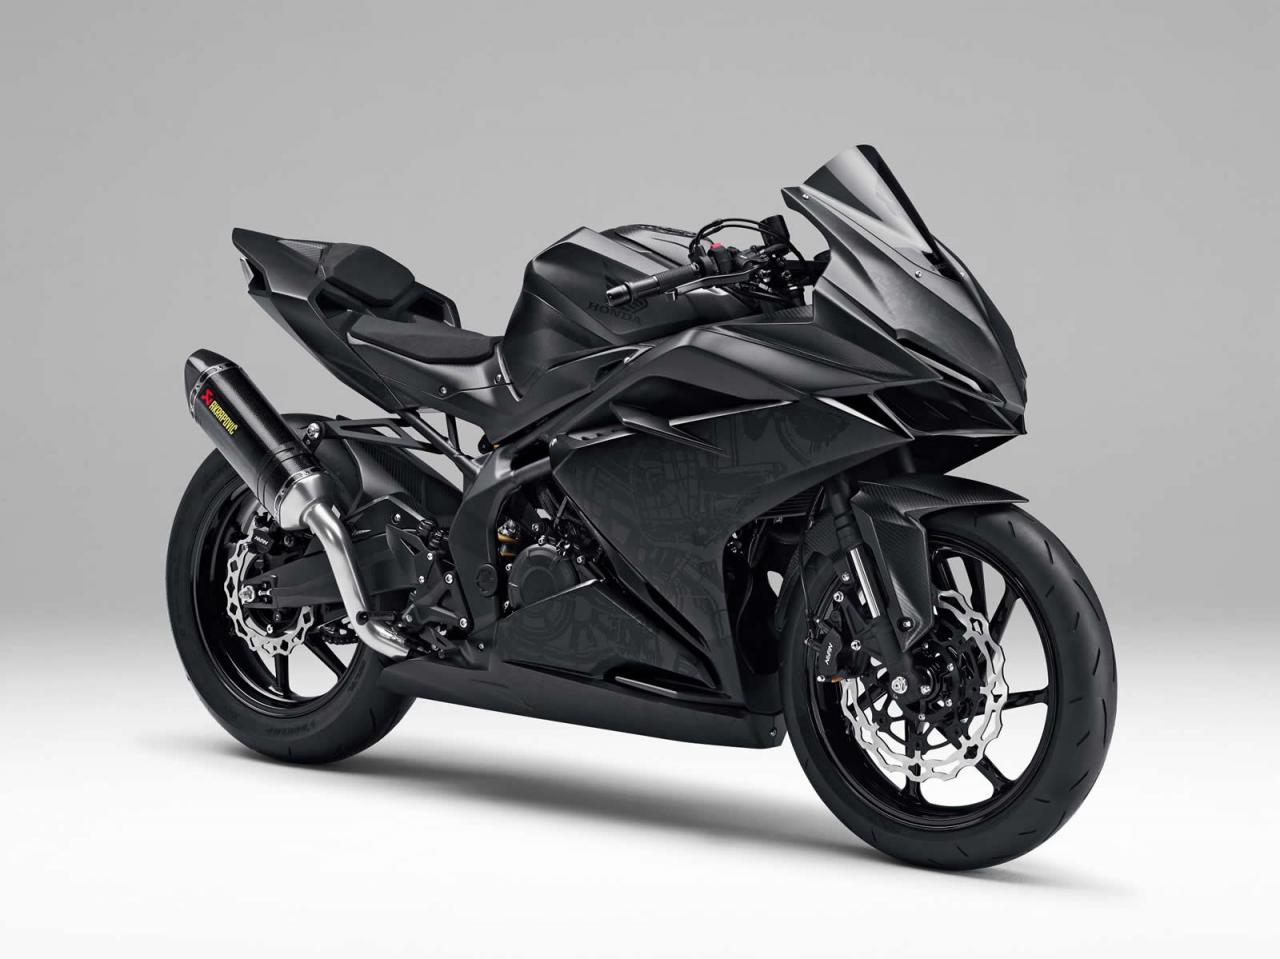 Is This the 2020 Honda CBR300RR?